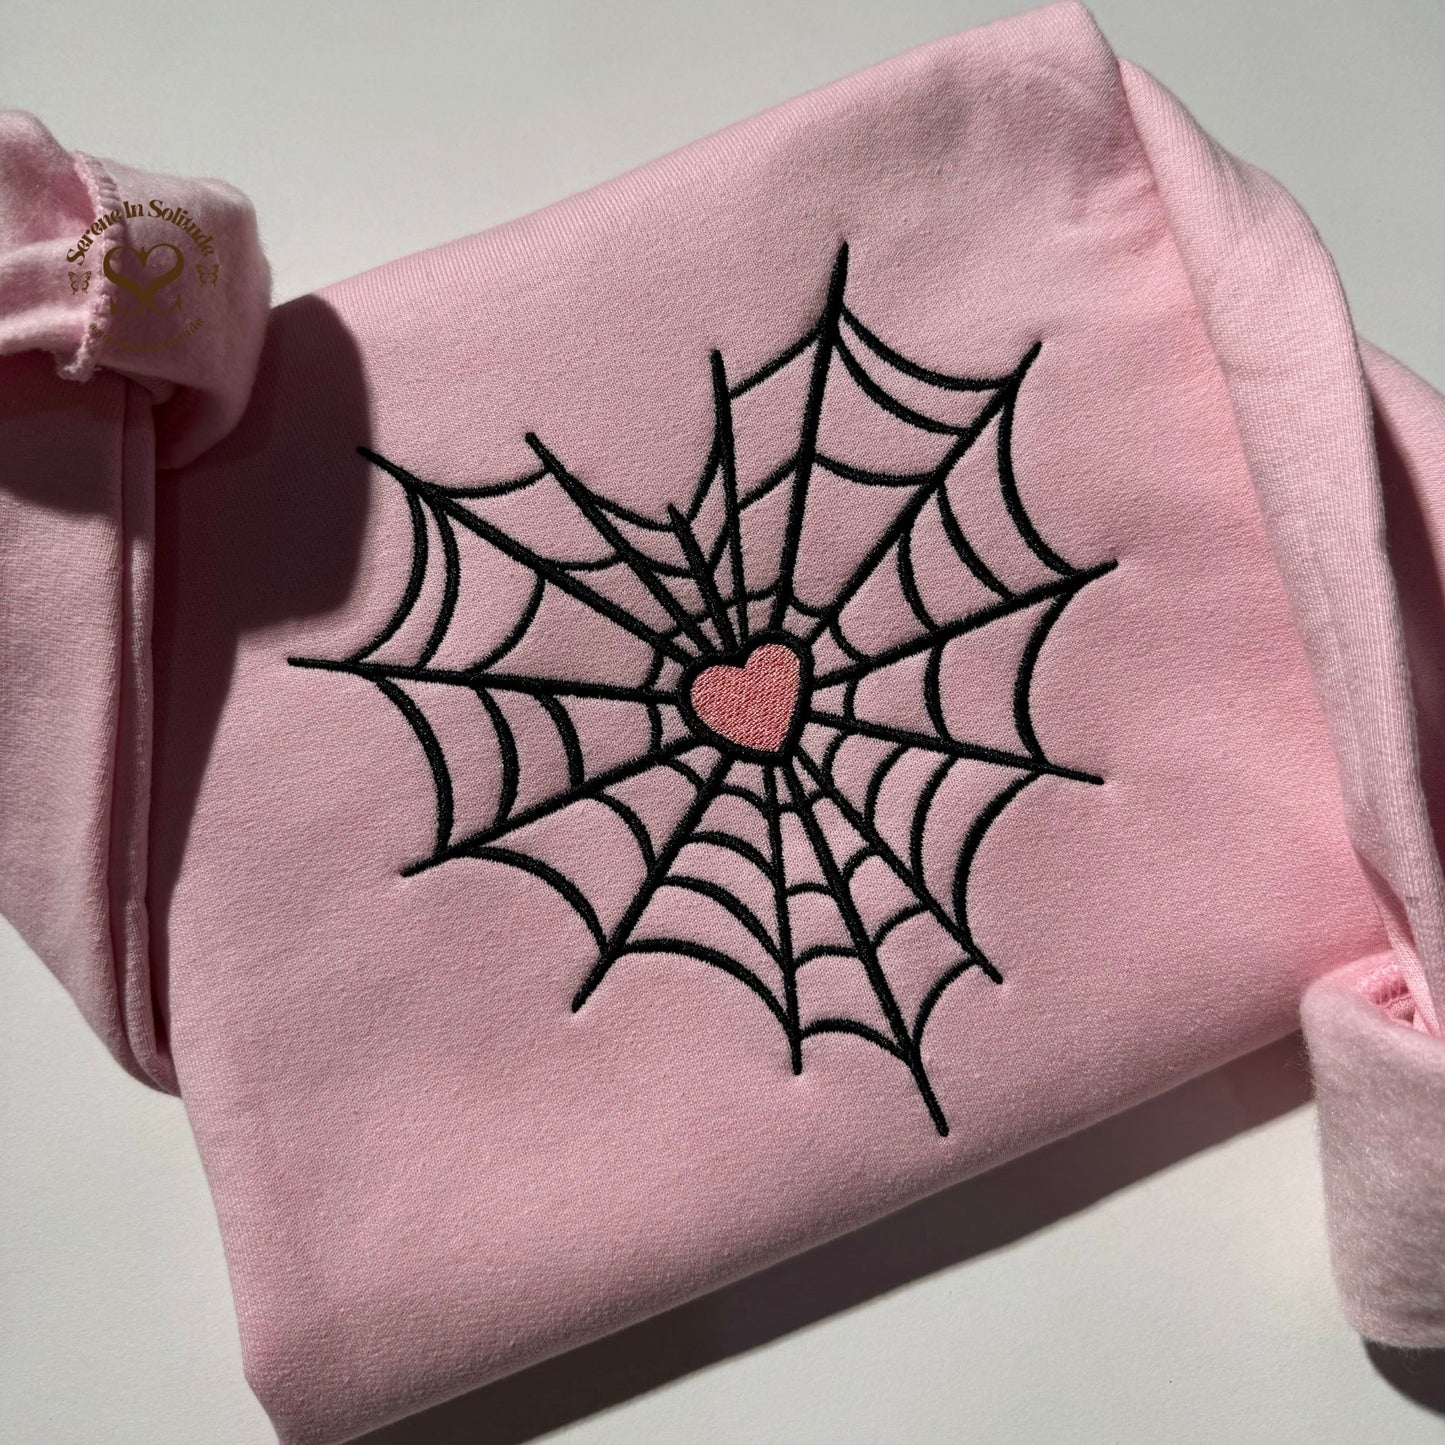 KIDS Embroidered Pink Spider Web Heart